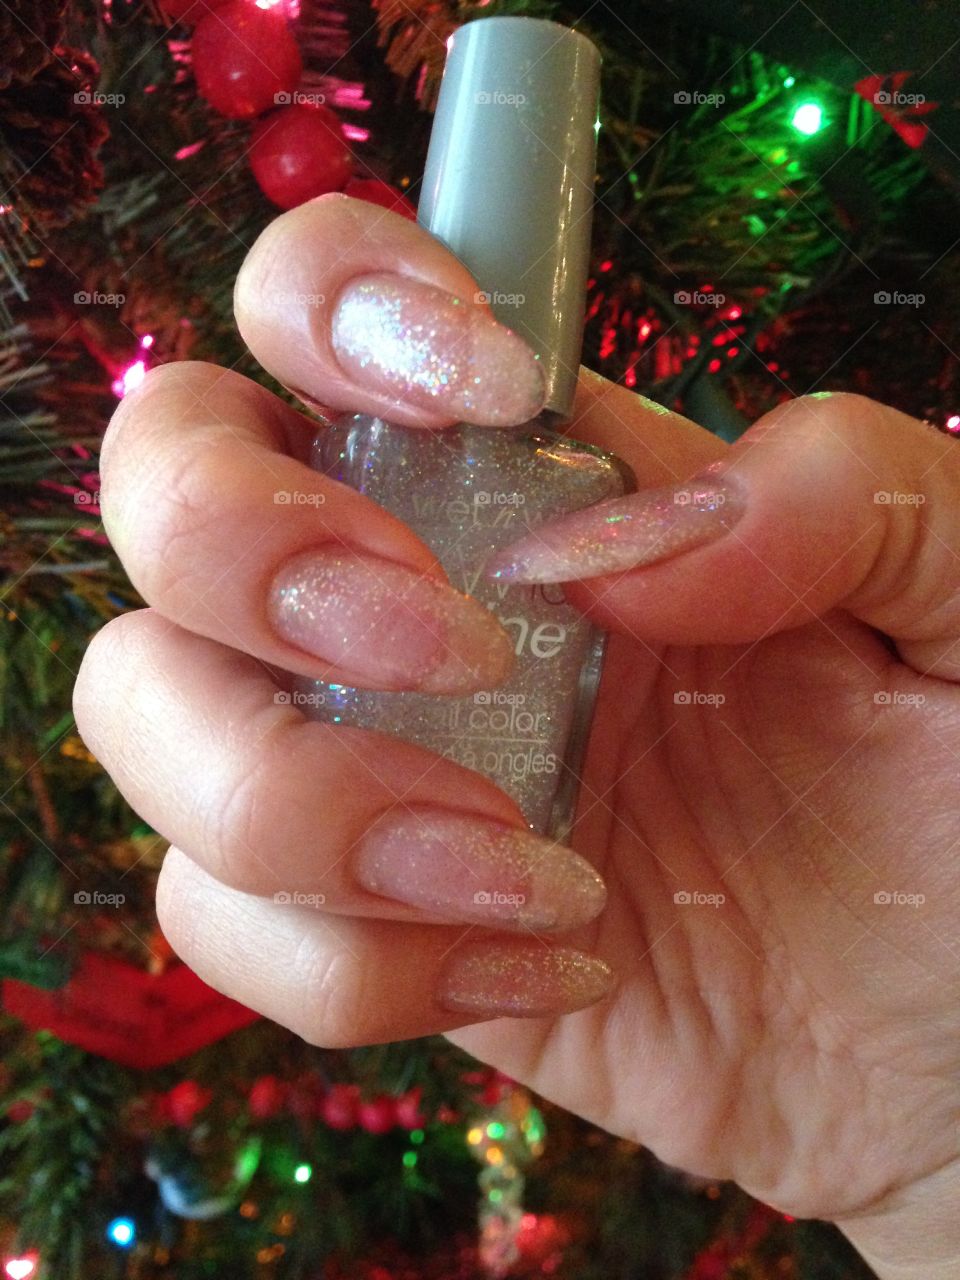 Almond nails with polish bottle and Christmas lights